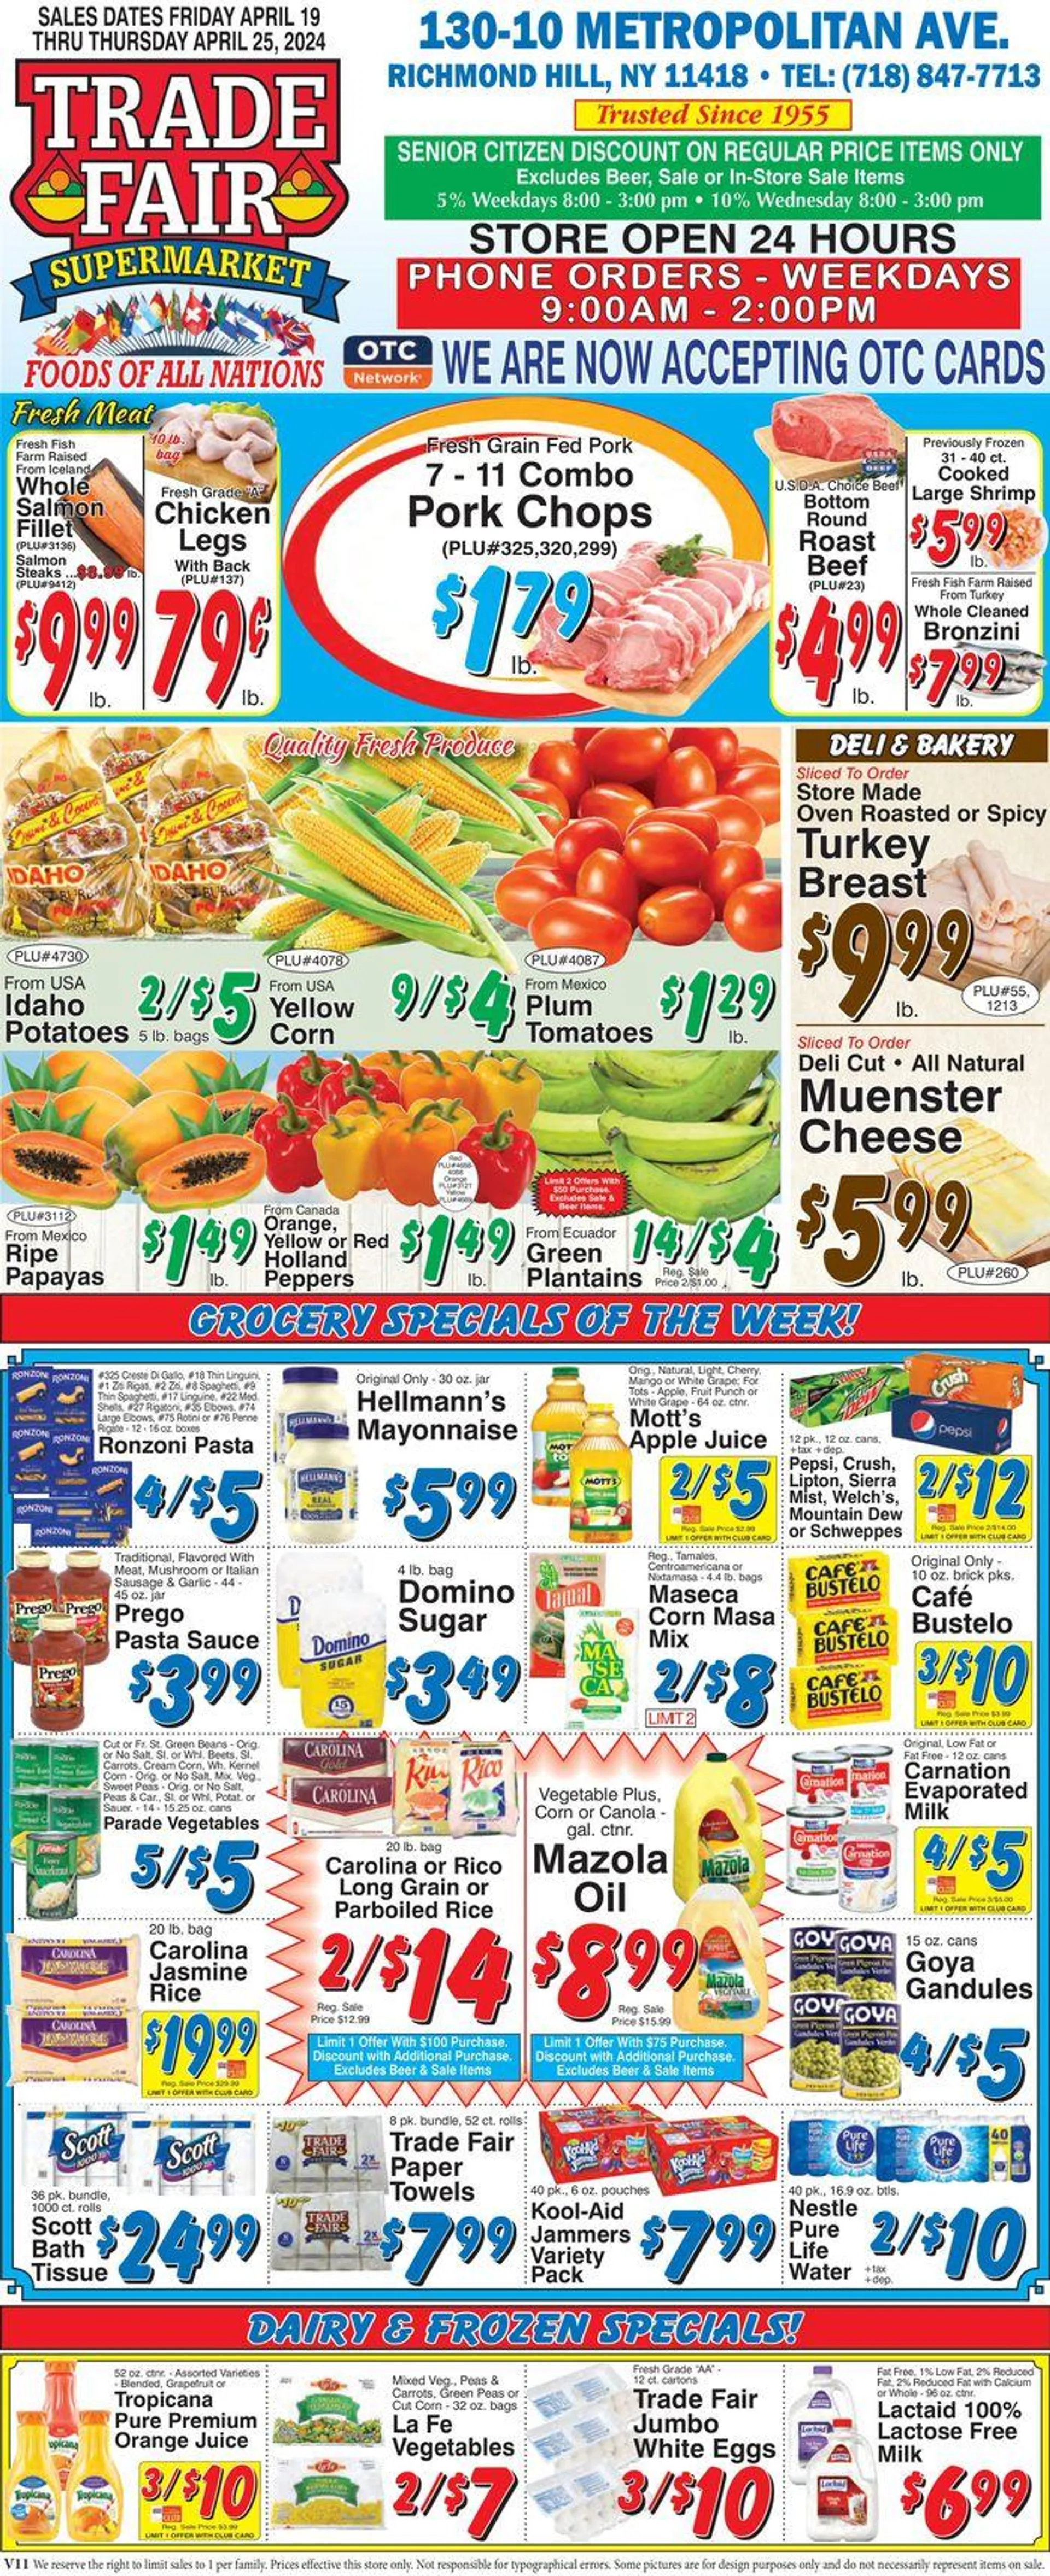 Fill Your Pantry With Savings - 1